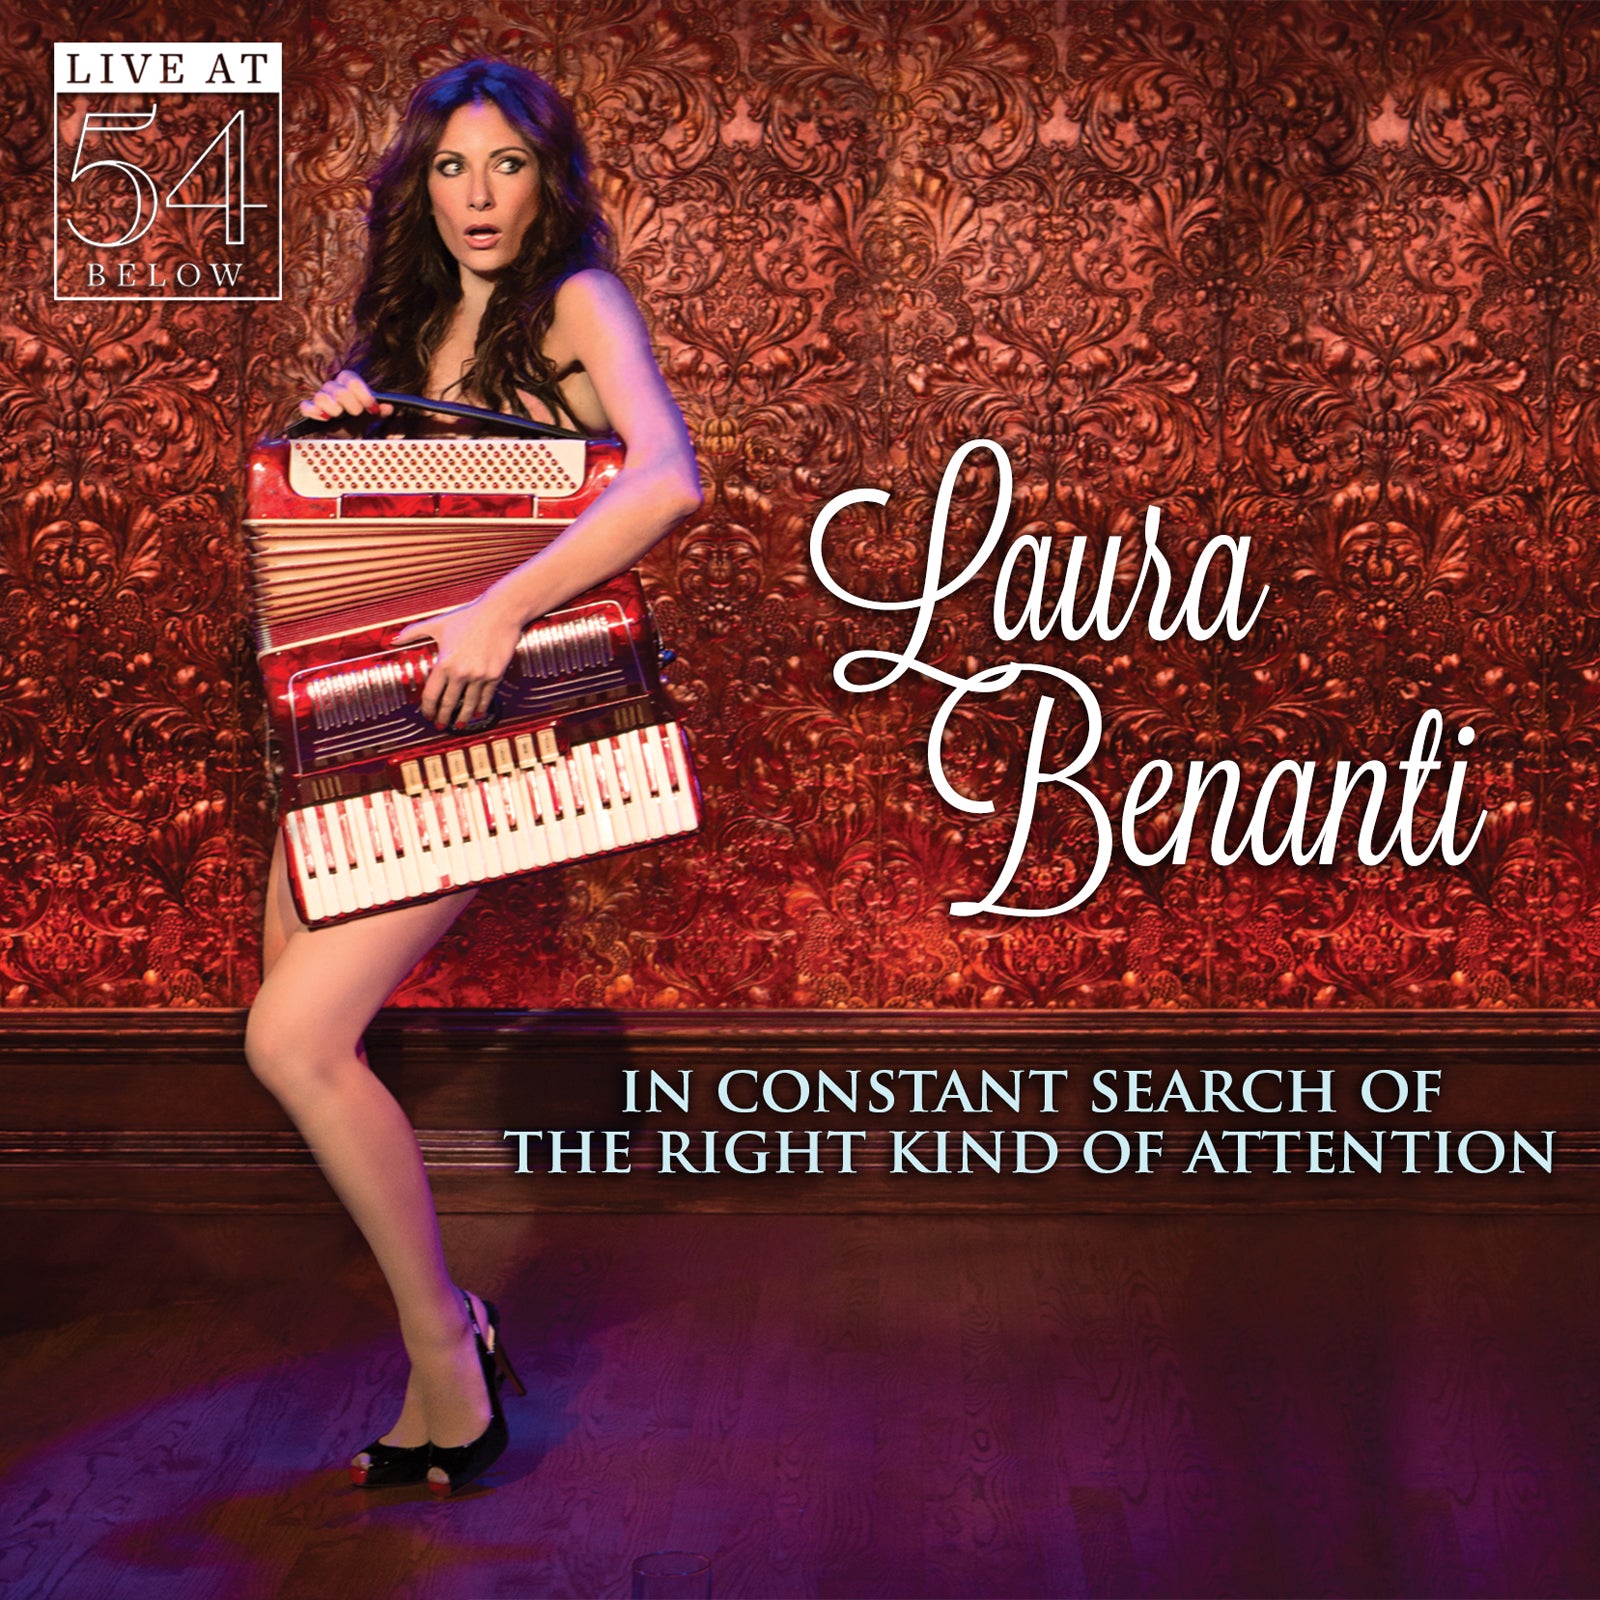 Laura Benanti: In Constant Search of the Right Kind of Attention - Live at 54 Below  [CD]